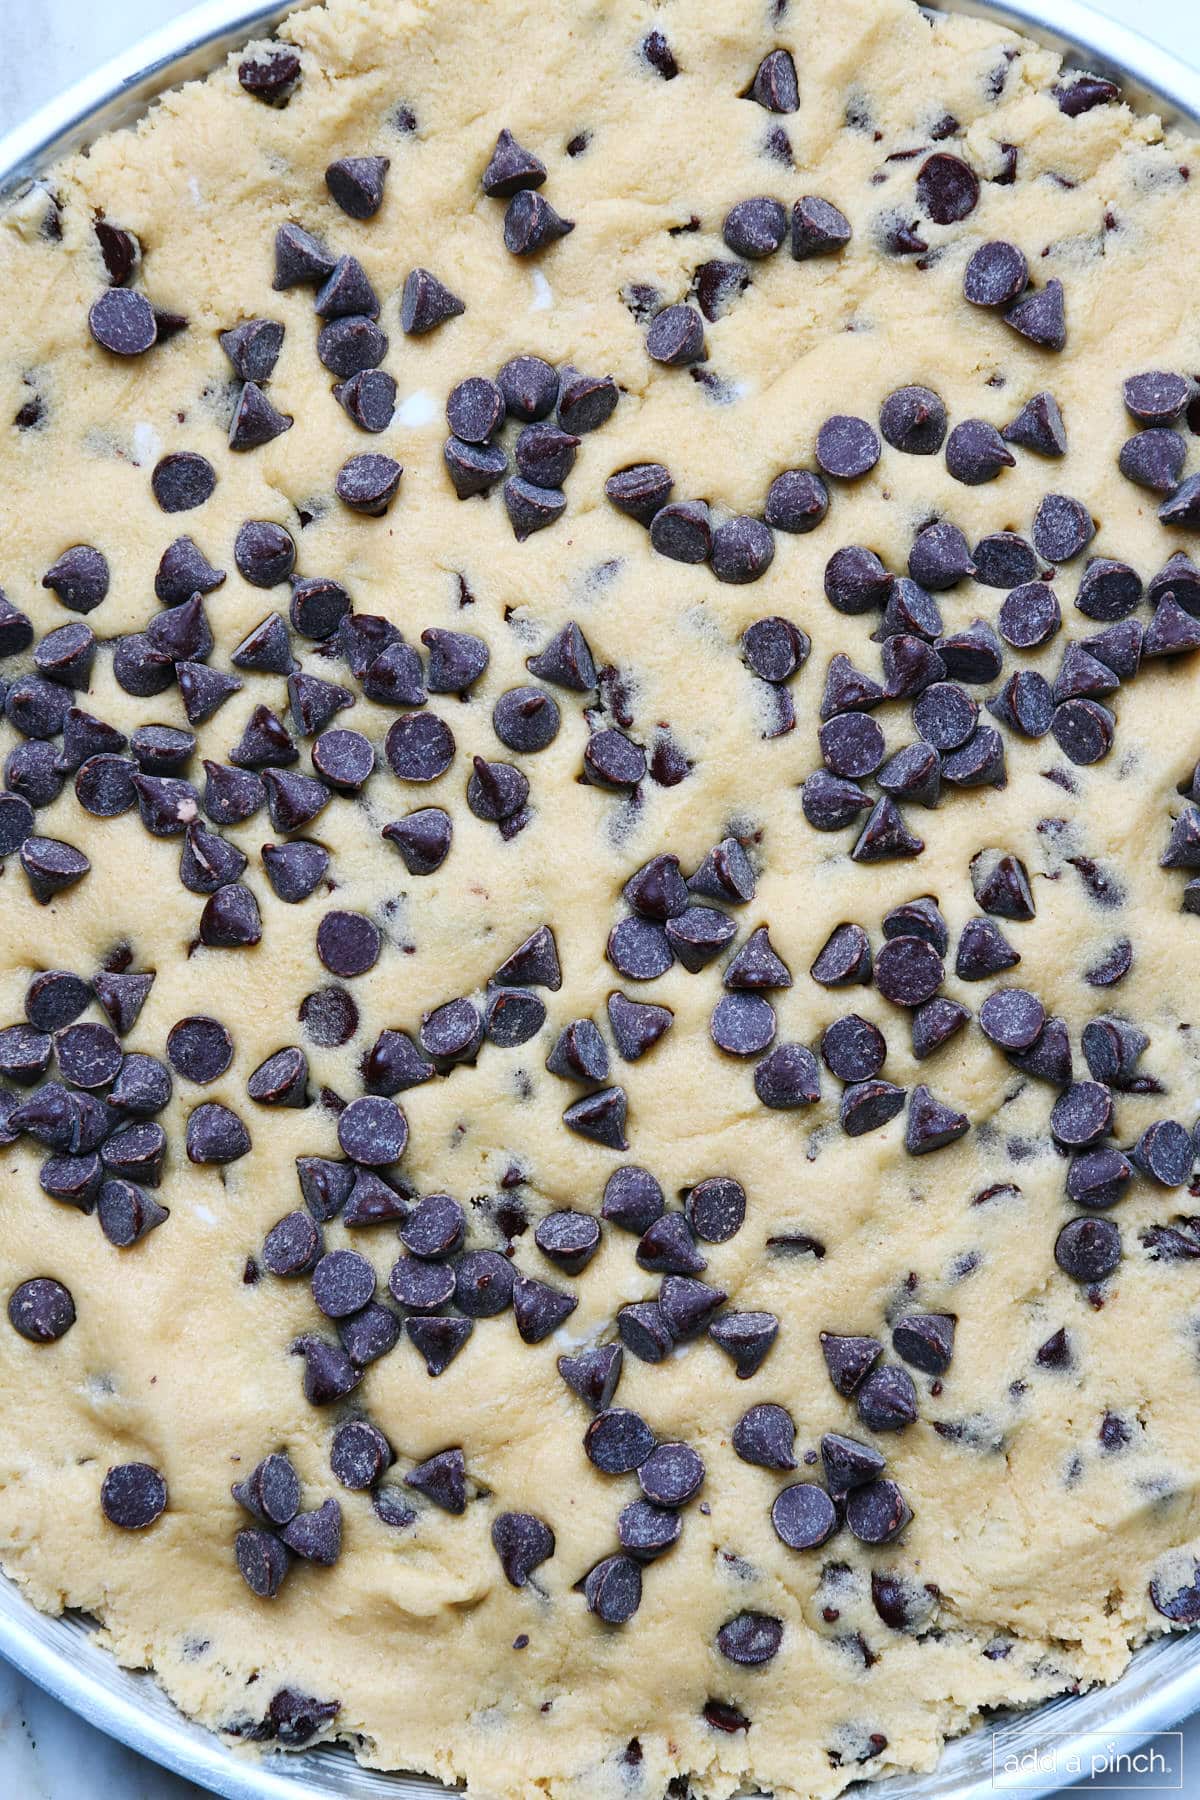 Cookie cake dough is pressed into cake pan. Chocolate chips are sprinkled on top of dough.